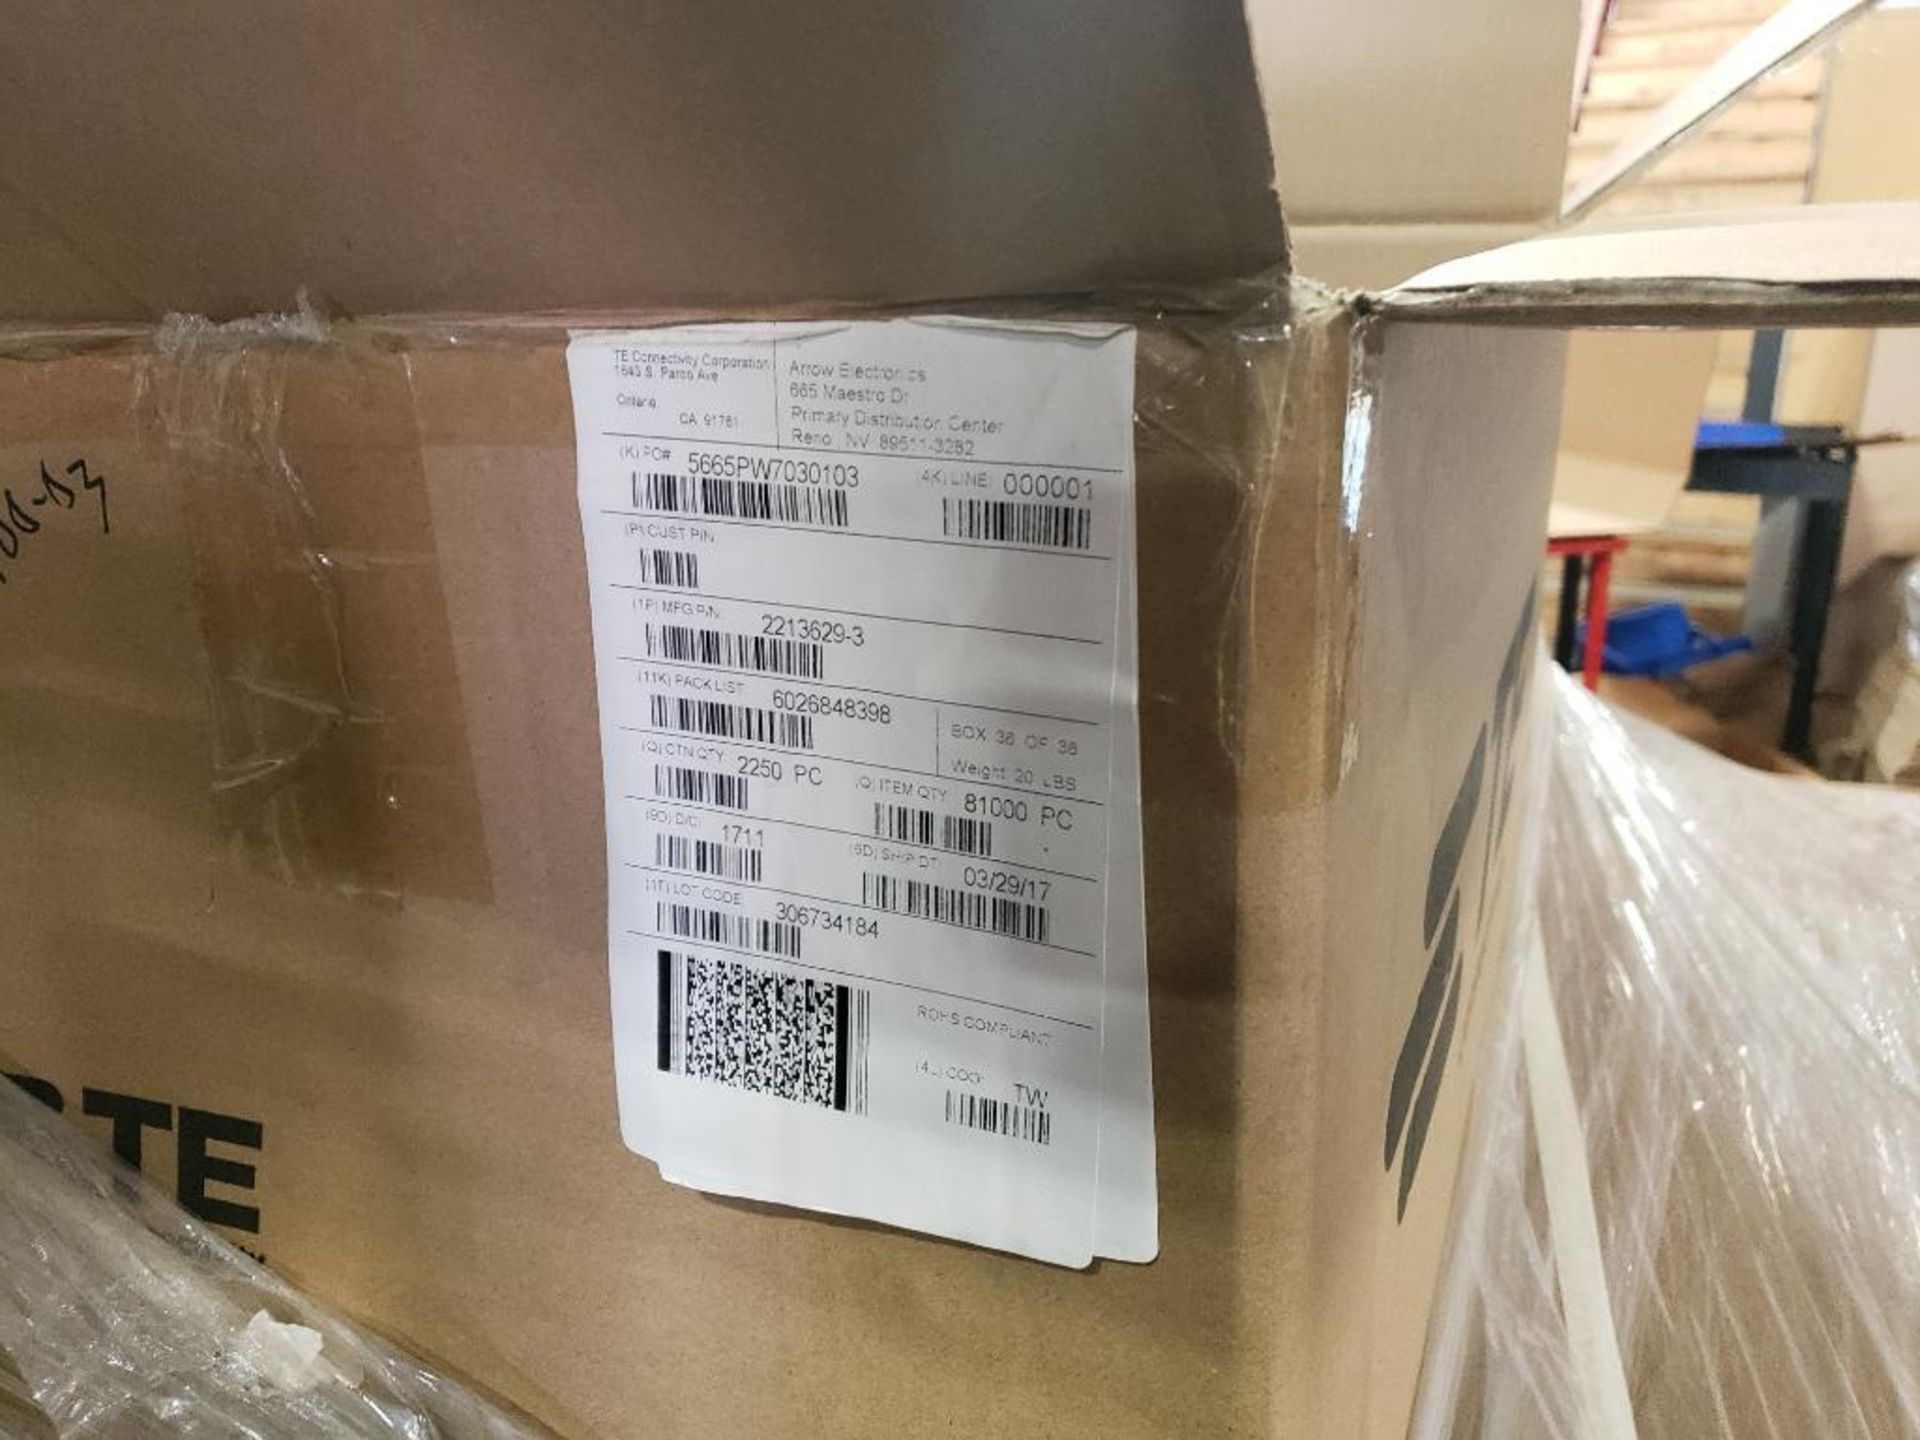 Qty 9000 - TE Connectivity part number 2213629-3. (4 bulk boxes of 9 reels) - Image 13 of 14